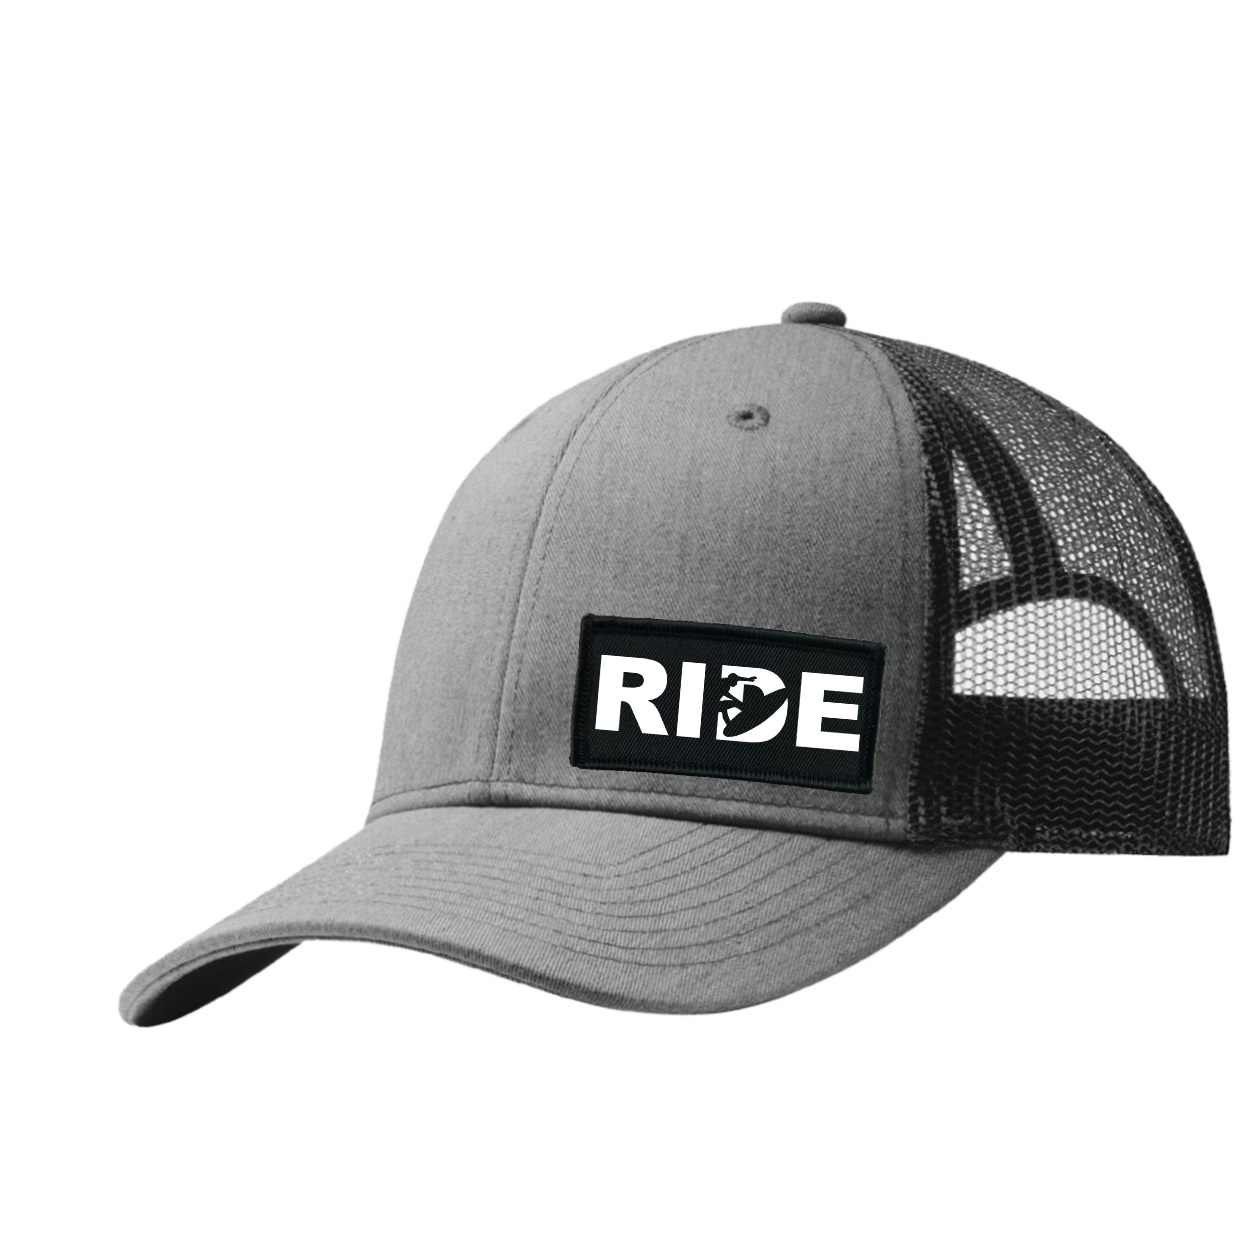 Ride Surf Logo Night Out Woven Patch Snapback Trucker Hat Heather Gray/Black (White Logo)